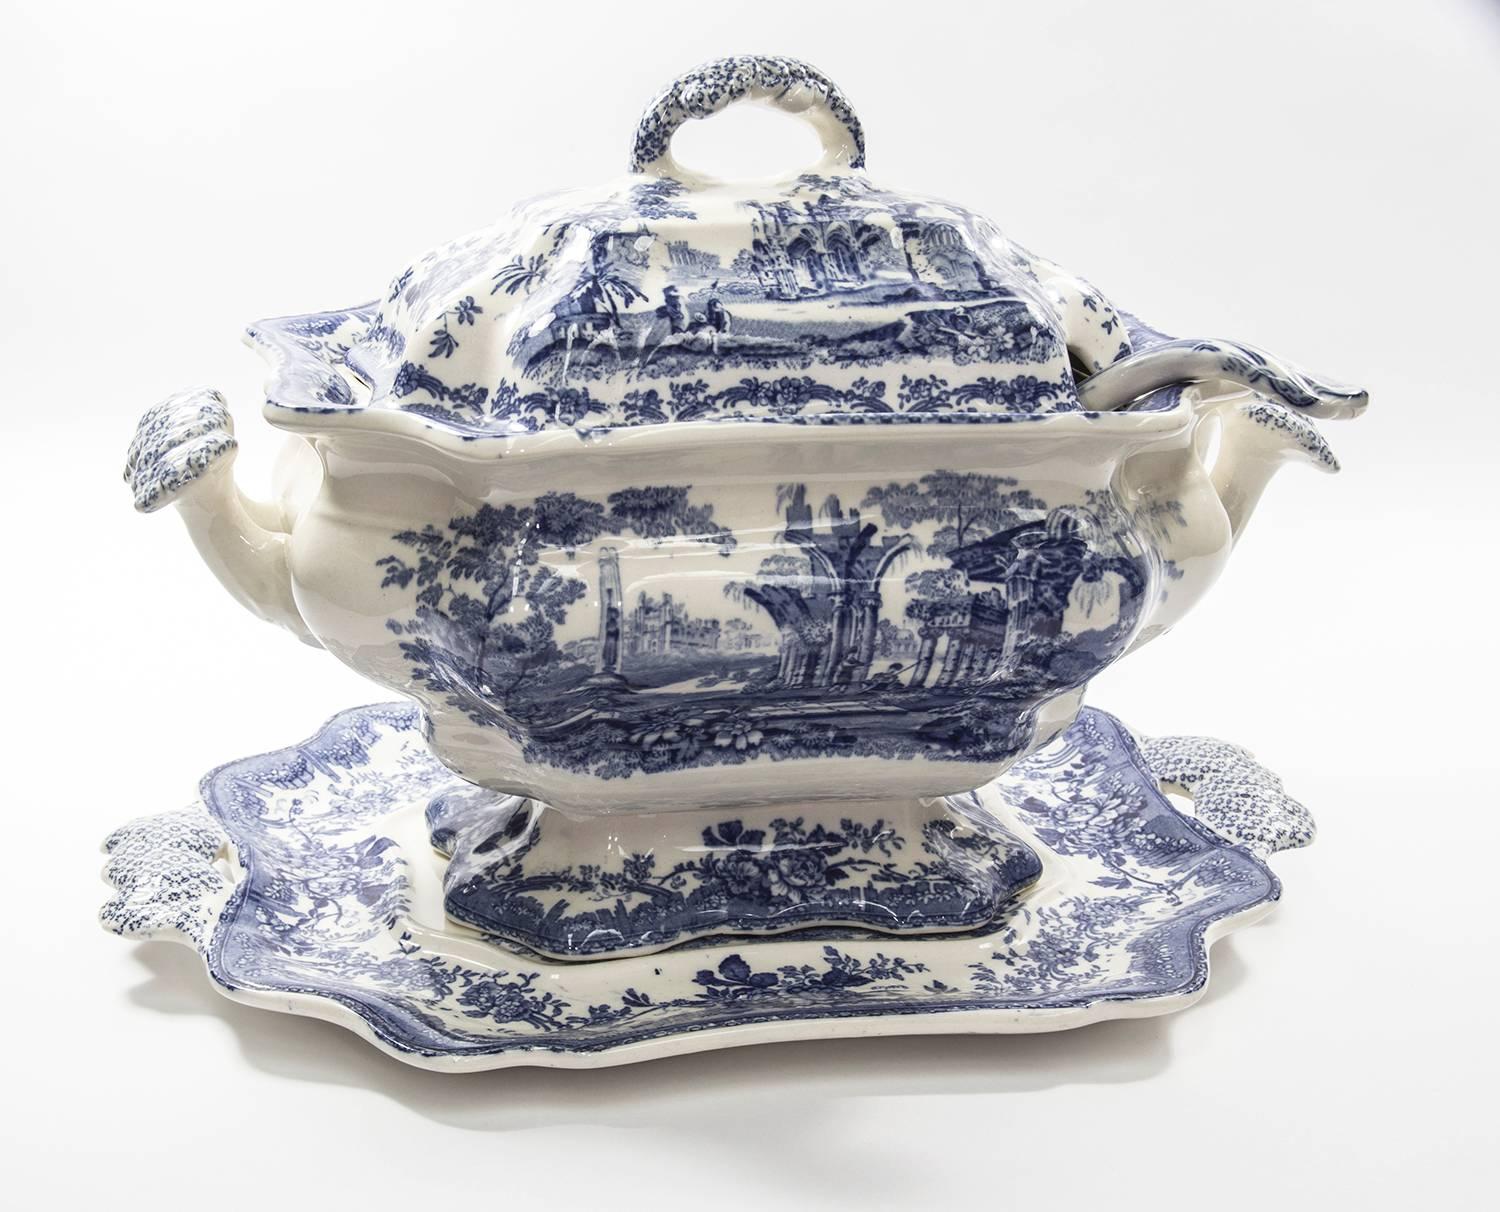 Masons Ironstone China Blue Canton Style Covered Tureen, Ladle and Underplate  3